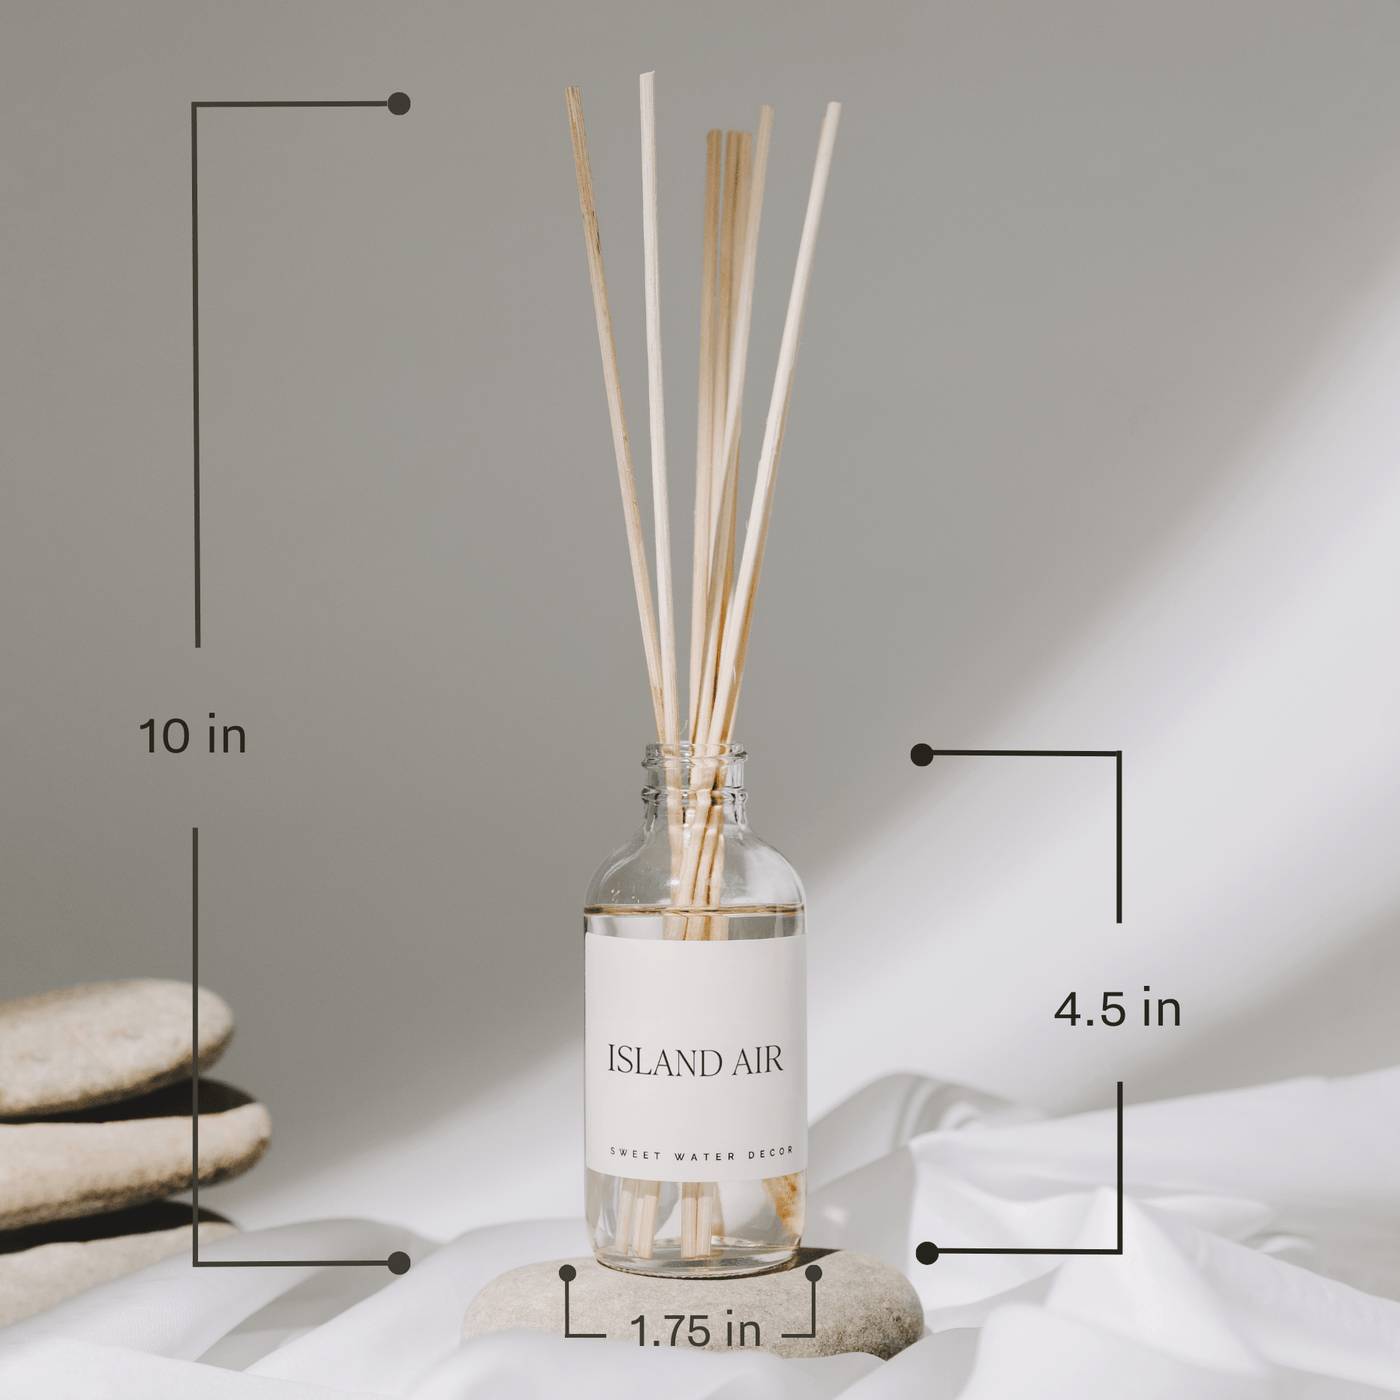 Luxury Getaway Clear Reed Diffuser - Sweet Water Decor - Reed Diffusers